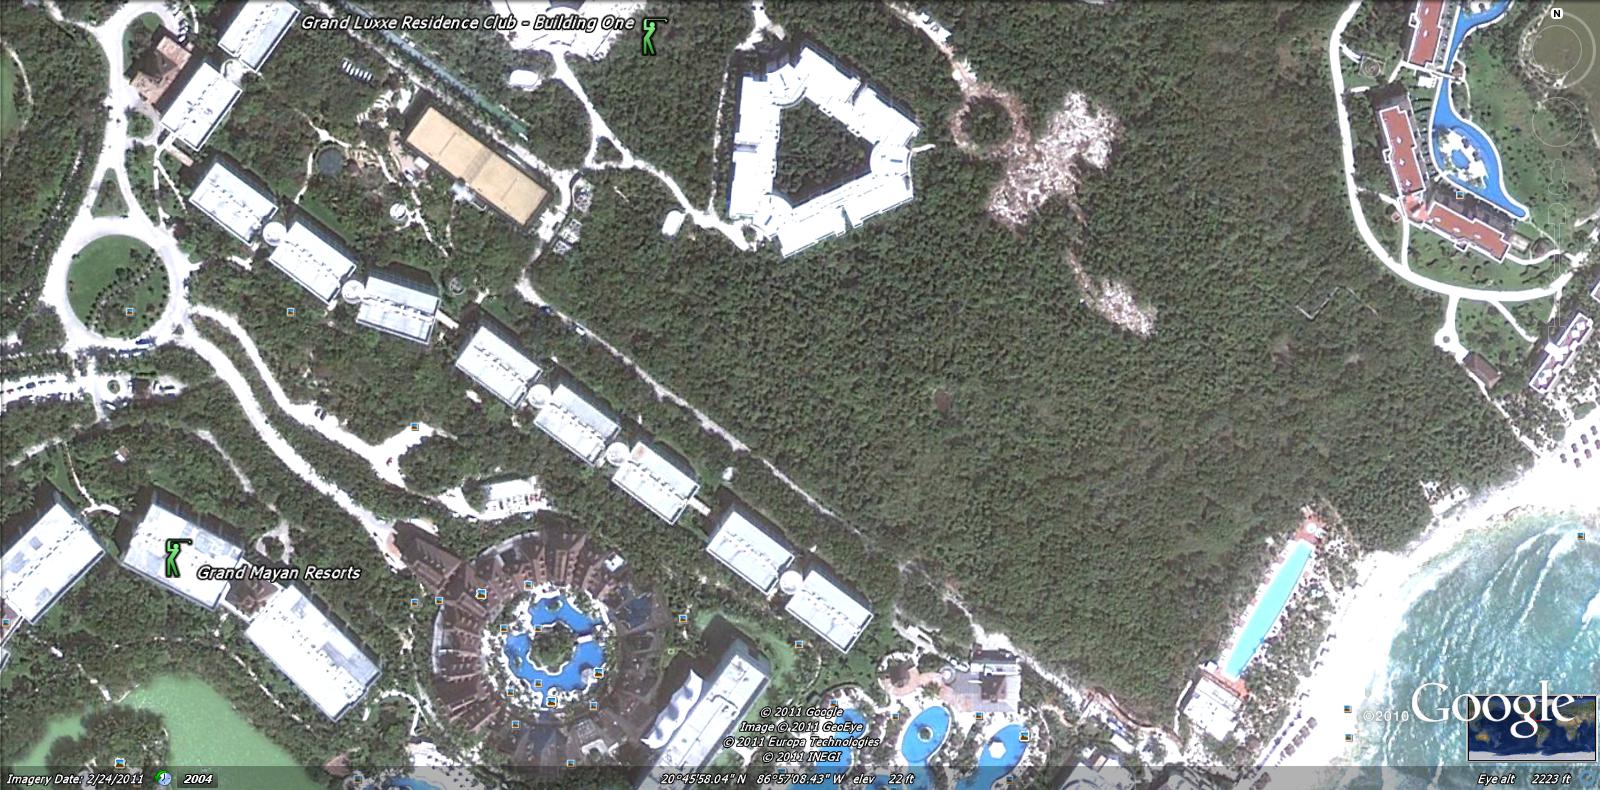 Grand Luxxe Residence Club Buildings - Google Earth Feb 24 2011